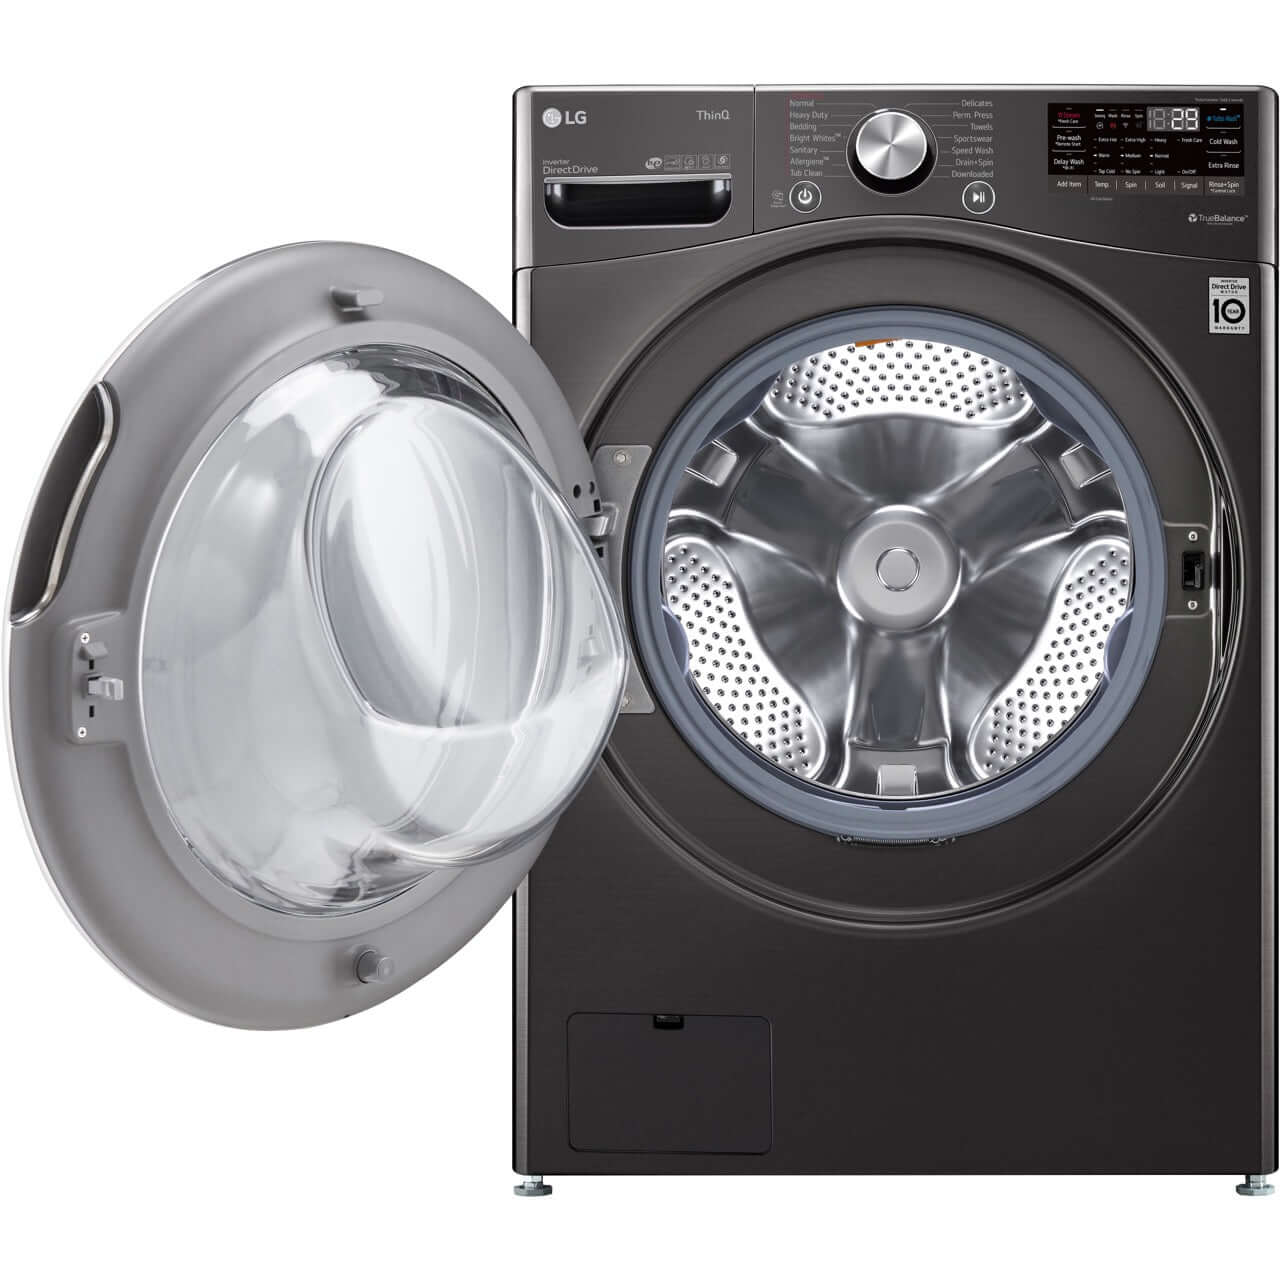 LG 27 In. 5.0-Cu. Ft. Front Load Washer with Built-In Intelligence in Black Steel (WM4200HBA)